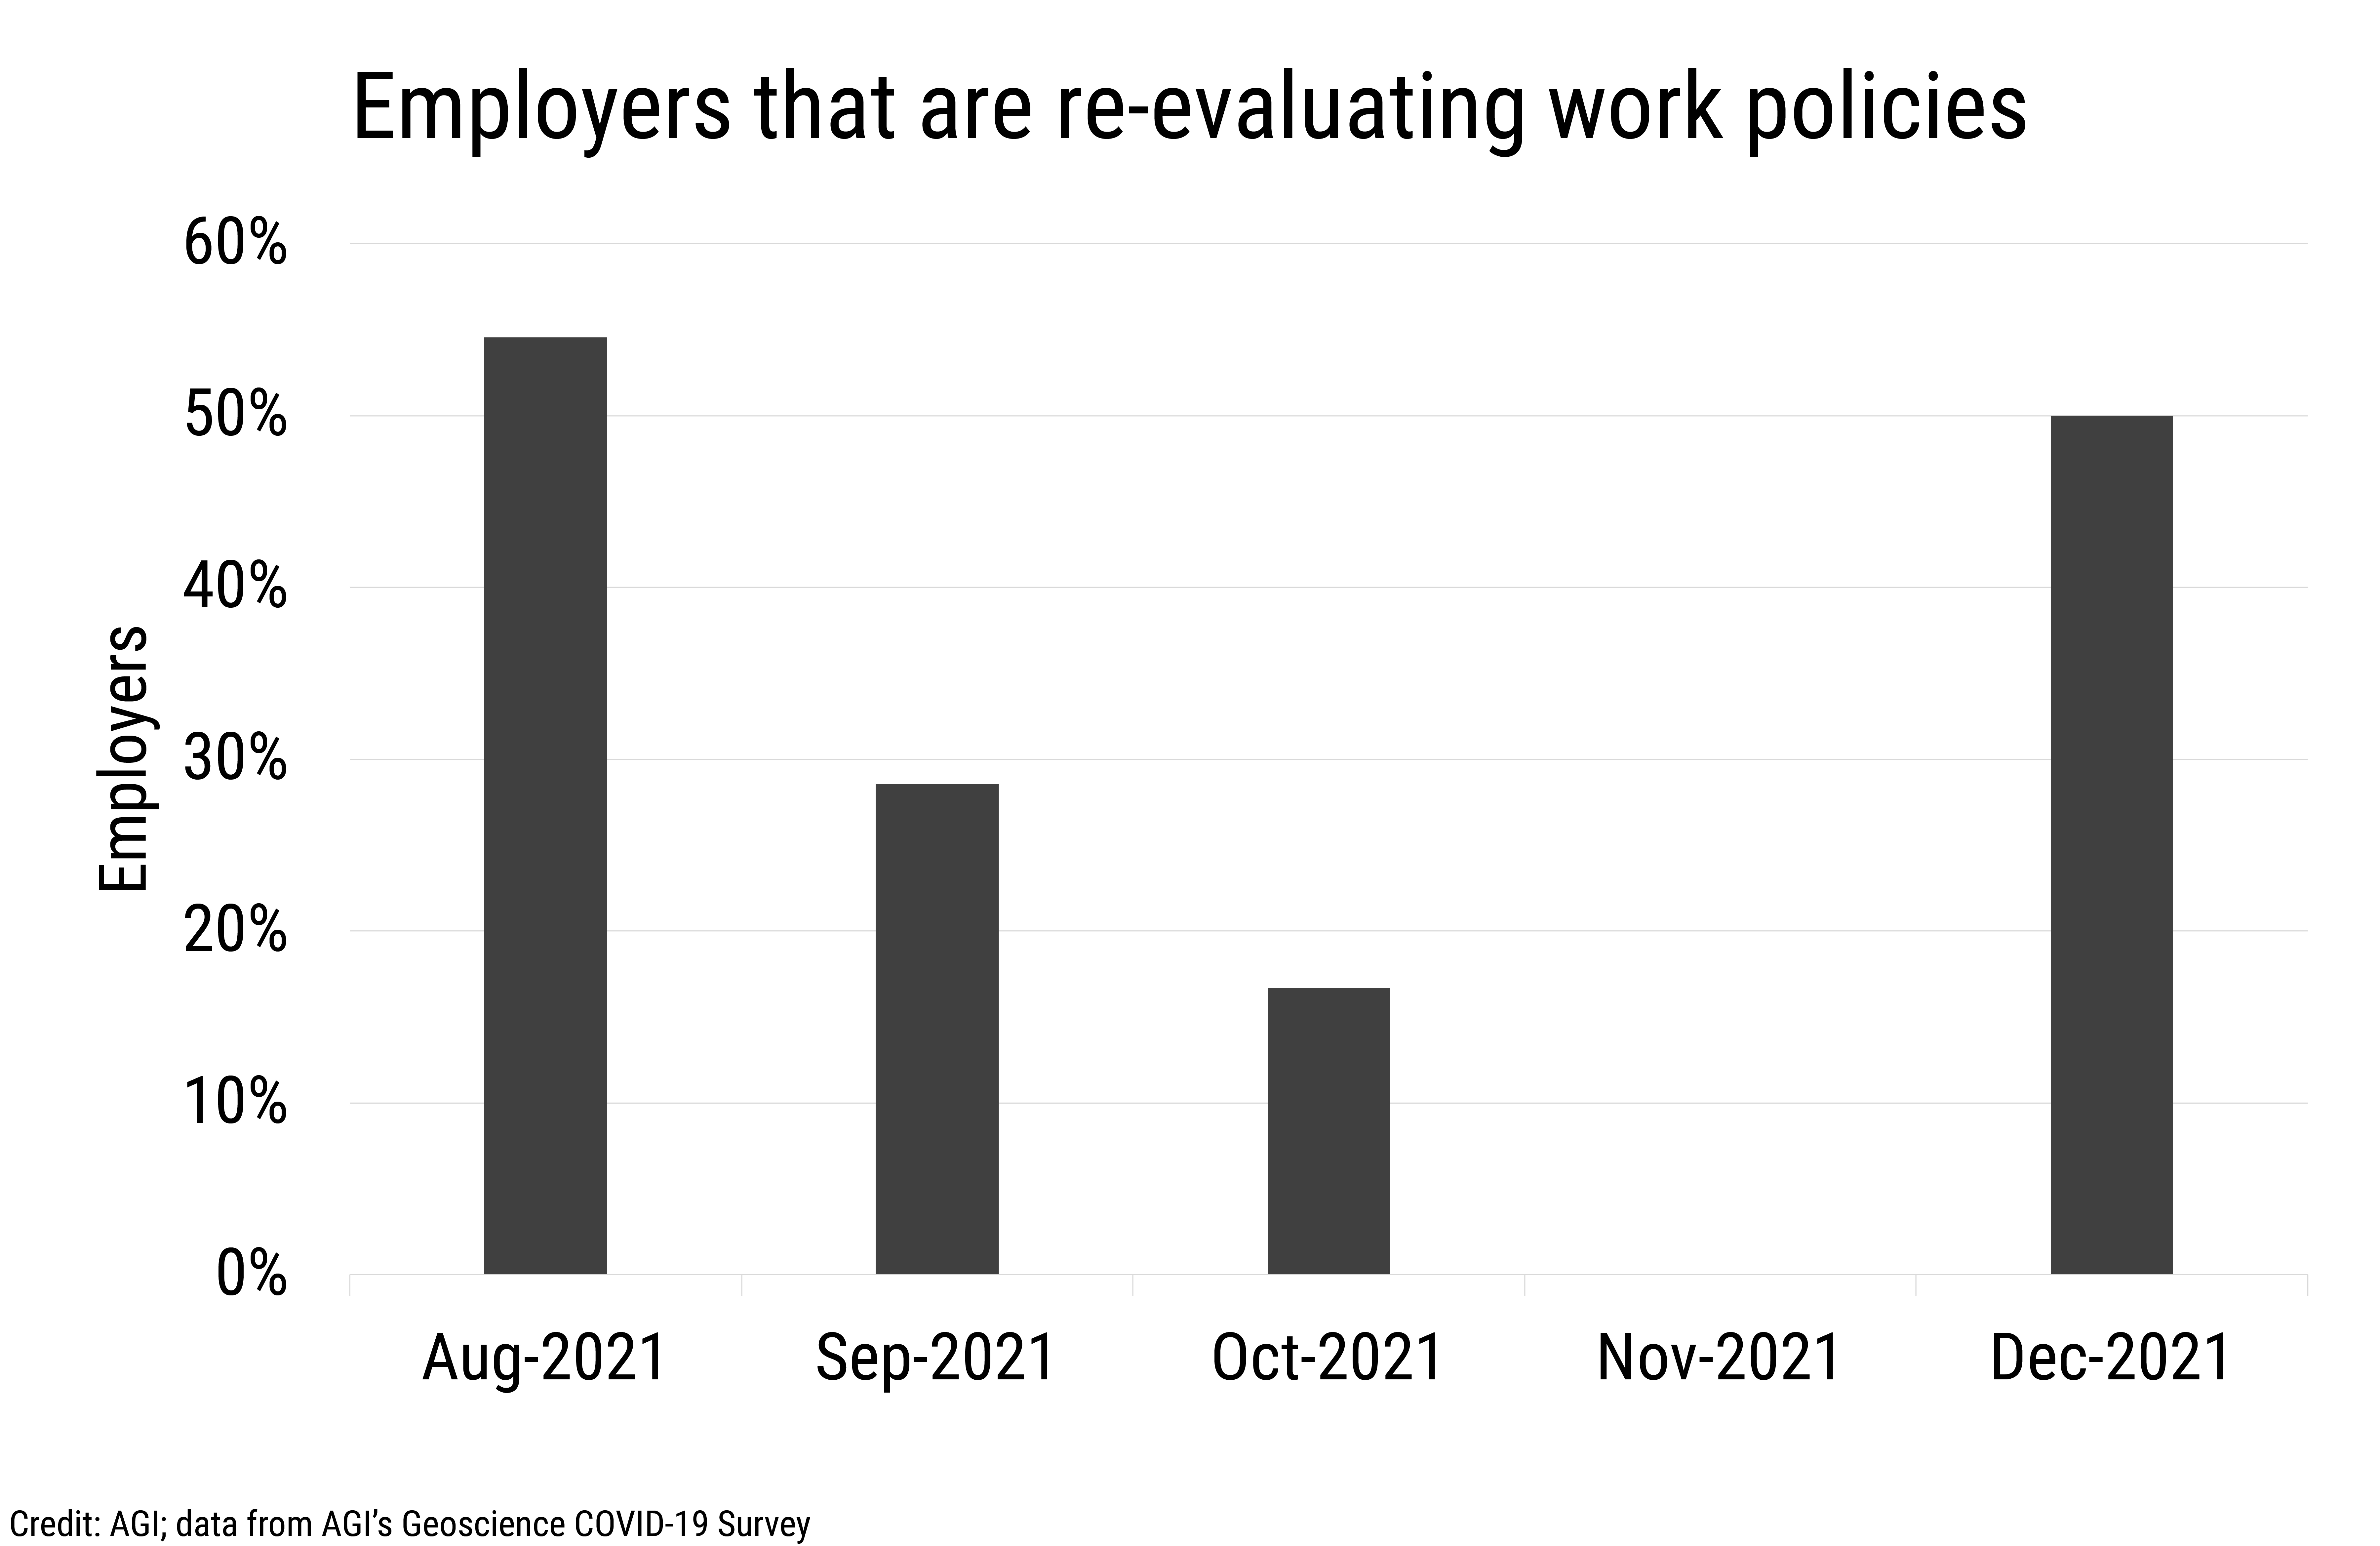 DB_2022-003 chart 09: Re-evaluation of work policies and remote-first options for employees (Credit: AGI; data from AGI's Geoscience COVID-19 Survey)